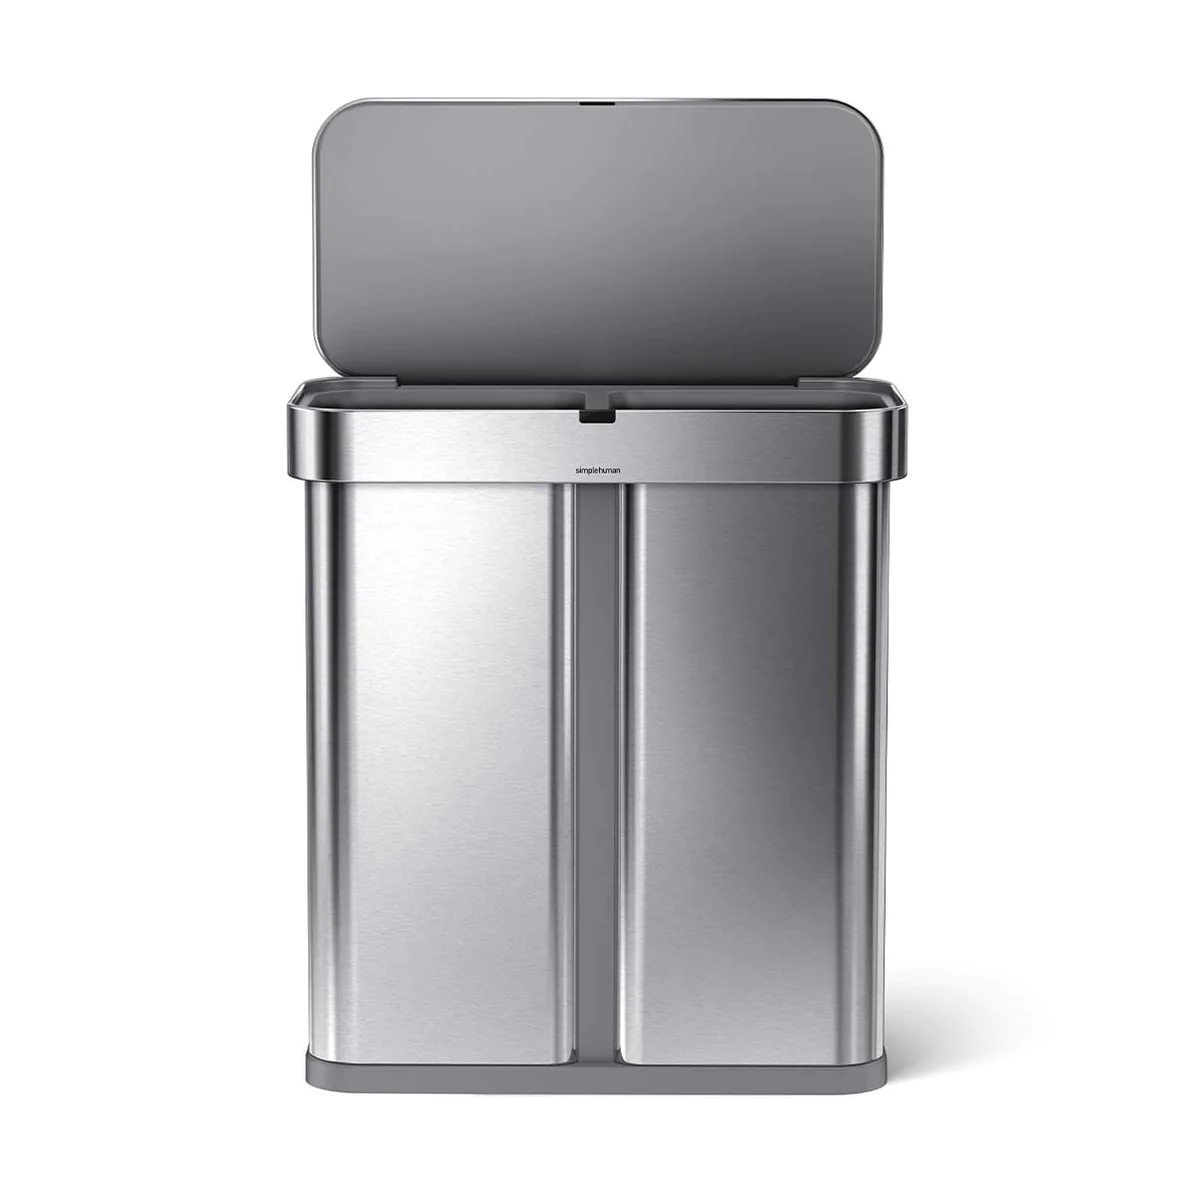 💝 Last day for clearance - Intelligent sensor trash can